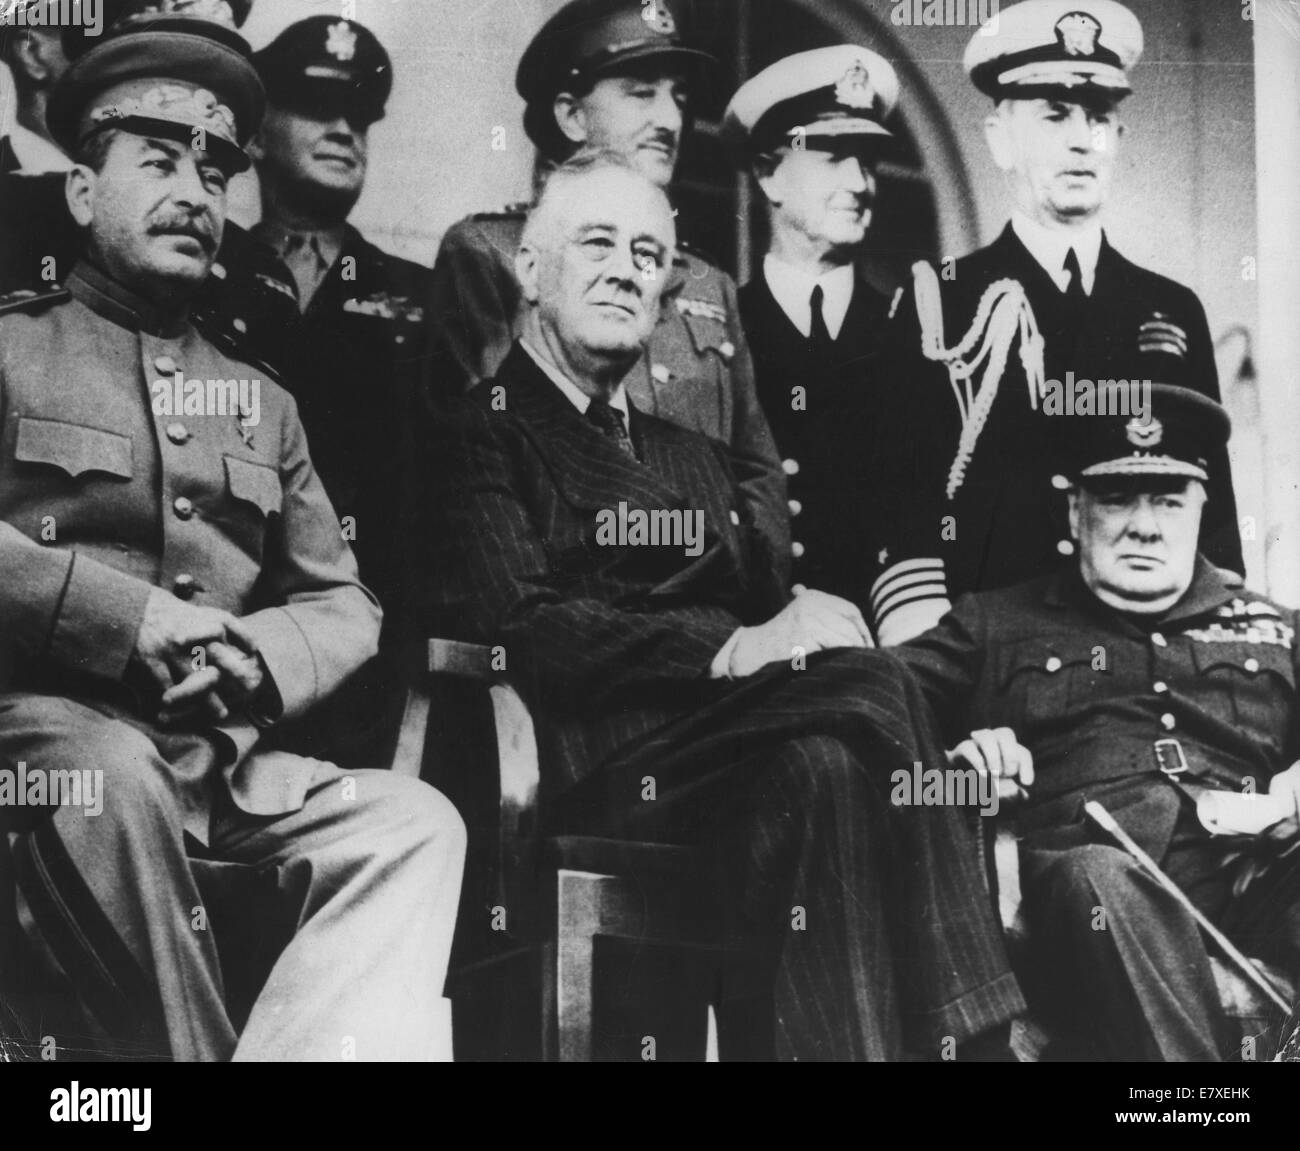 Nov 29, 1943 - Tehran, Iran - Historical encounter between General Secretary of the Communist Party JOSEPH STALIN, the U.S. President FRANKLIN D. ROOSEVELT and U.K. Prime Minister Sir WINSTON CHURCHILL during the Teheran Conference. The Tehran Conference (codenamed Eureka) was a strategy meeting held between Joseph Stalin, Franklin D. Roosevelt, and Winston Churchill from November 28 to December 1, 1943. It was held in the Soviet Embassy in Tehran, Iran and was the first of the World War II conferences held between all of the 'Big Three' Allied leaders (the Soviet Union, the United States, and Stock Photo